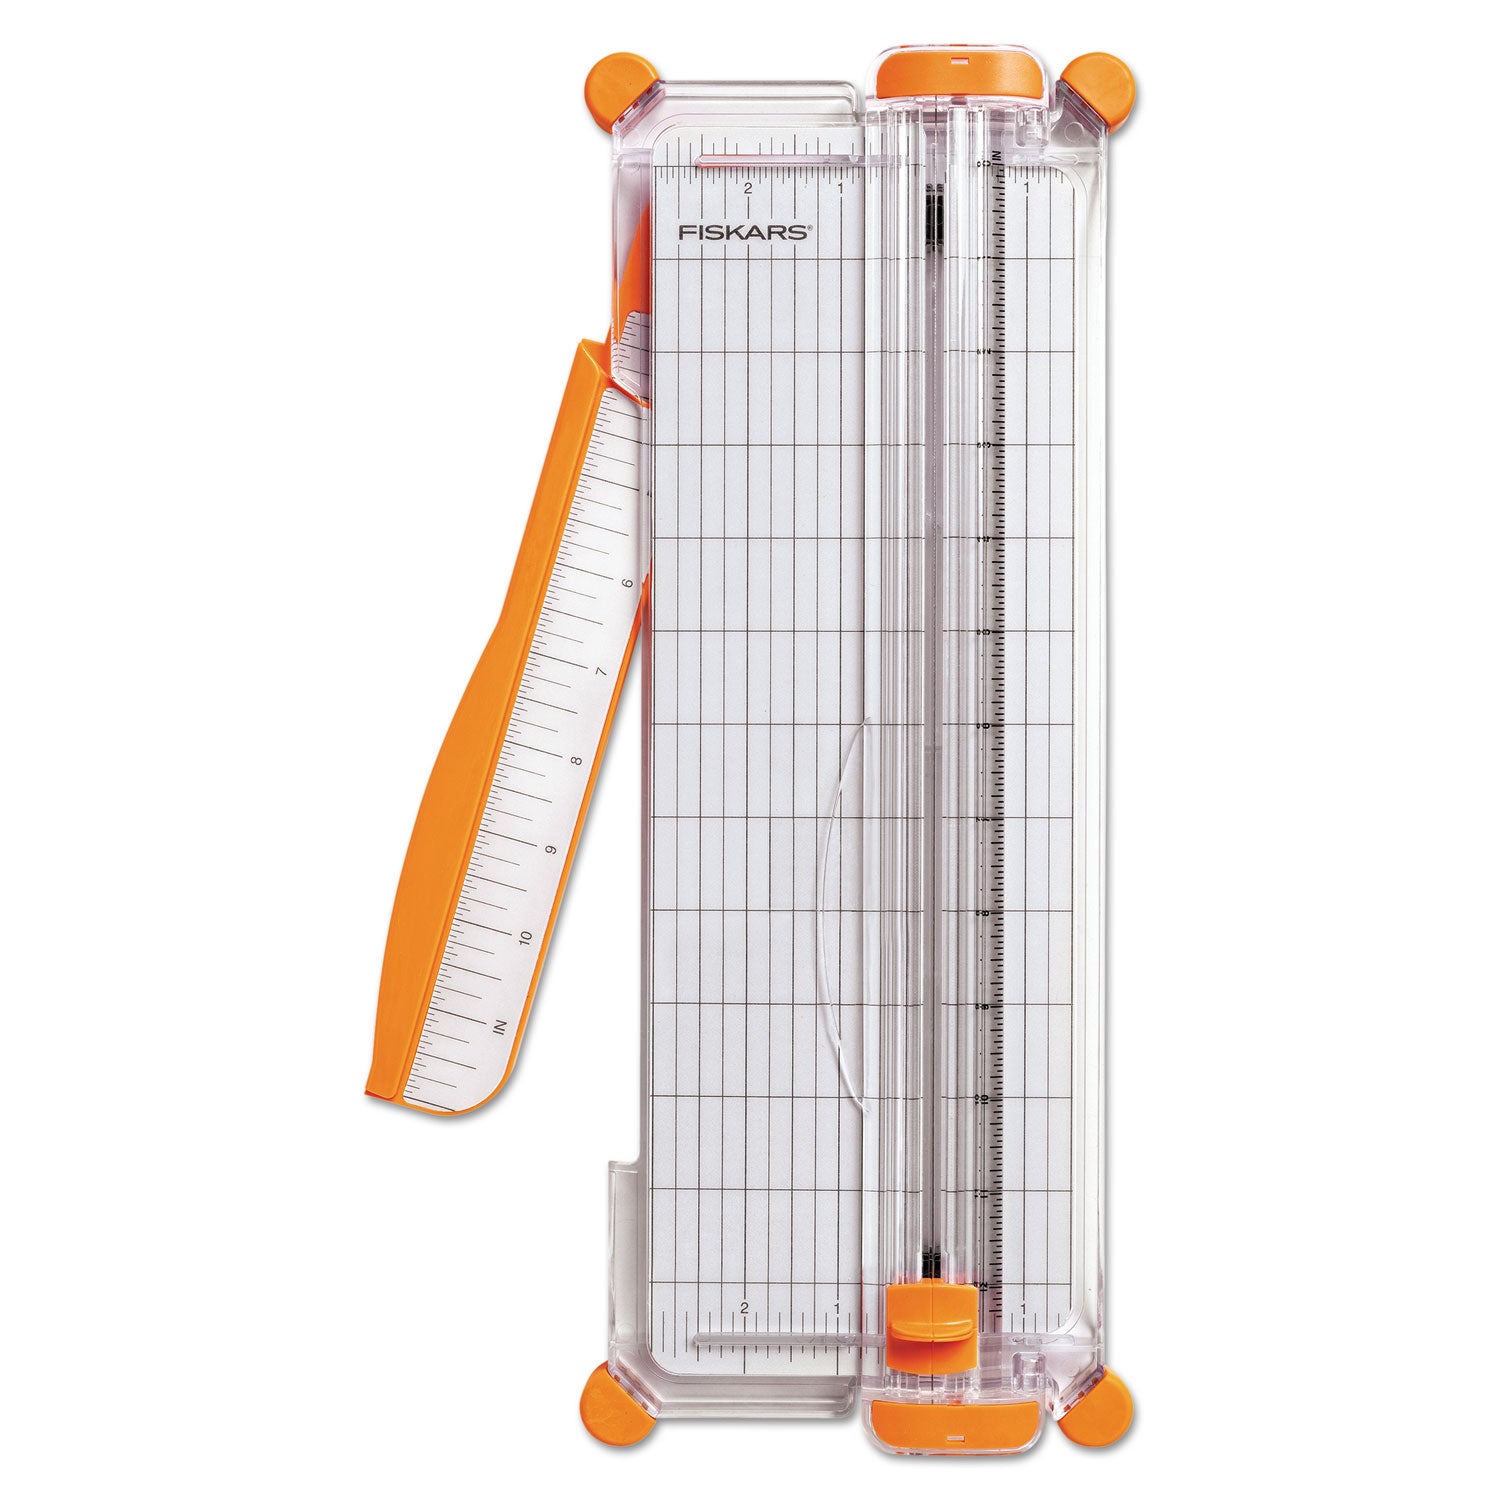 personal-paper-trimmer-7-sheets-12-cut-length-plastic-base-55-x-14_fsk1544501012 - 1